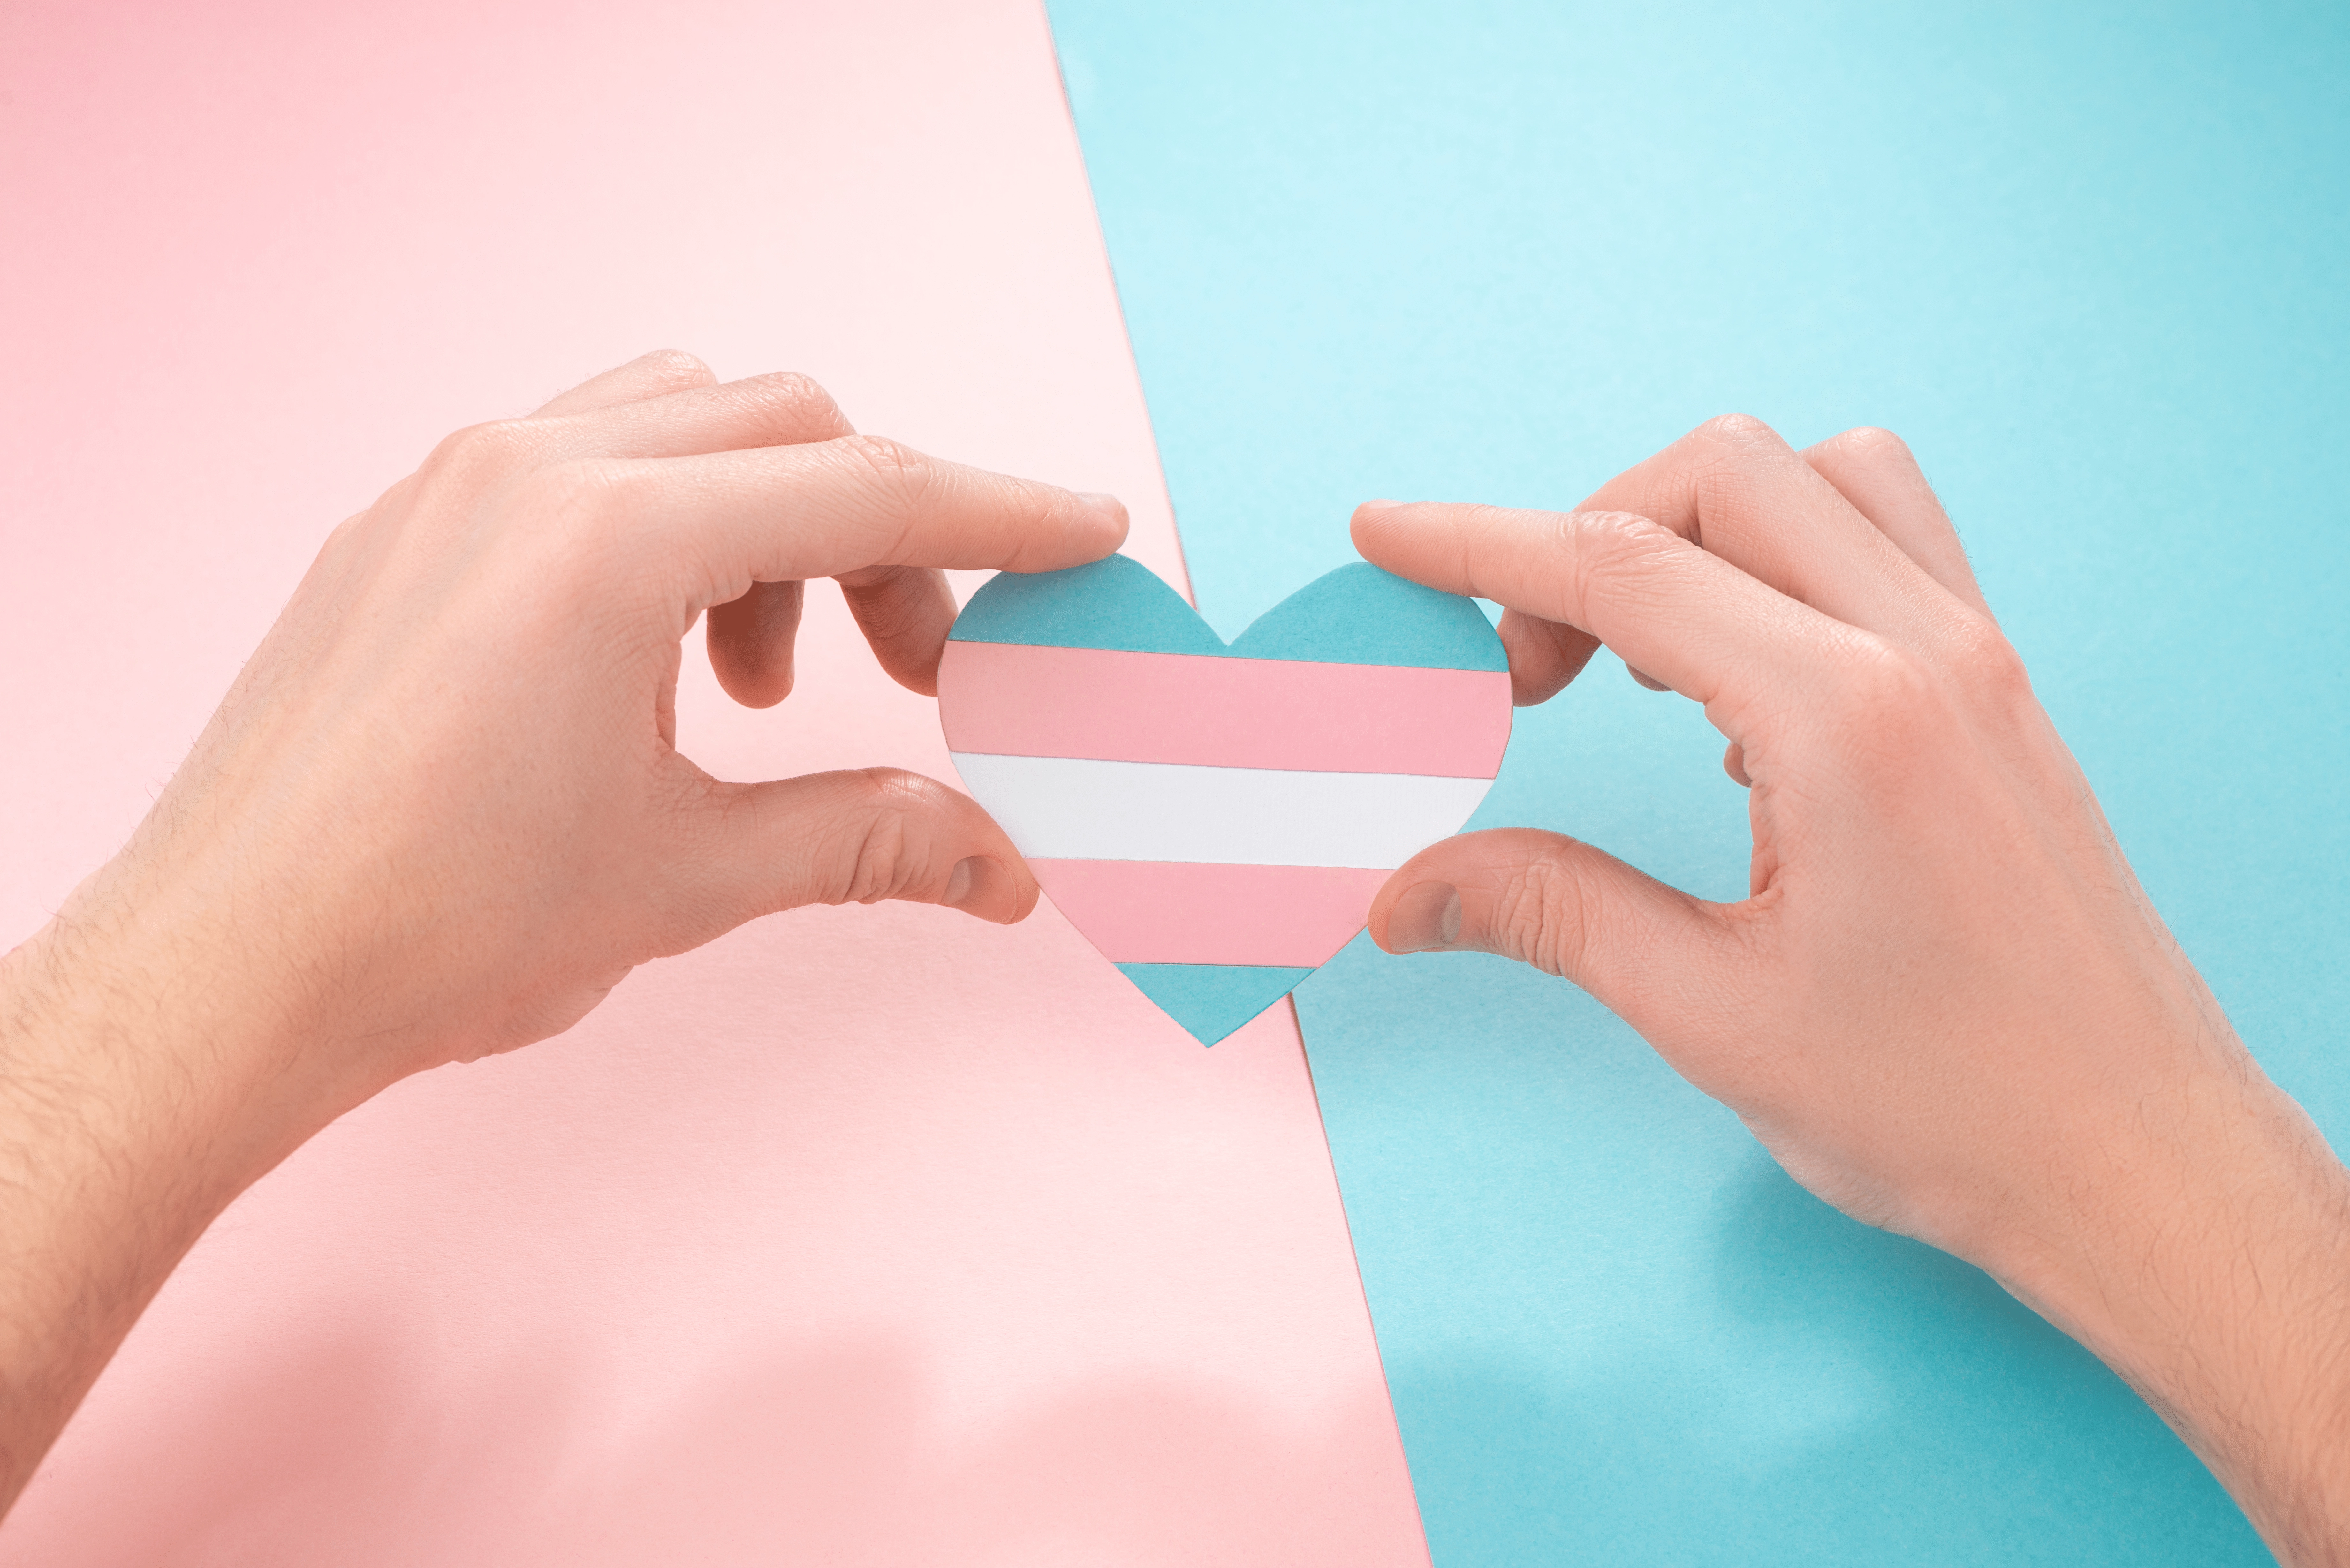 hands holding a paper heart cutout of the transgender flag